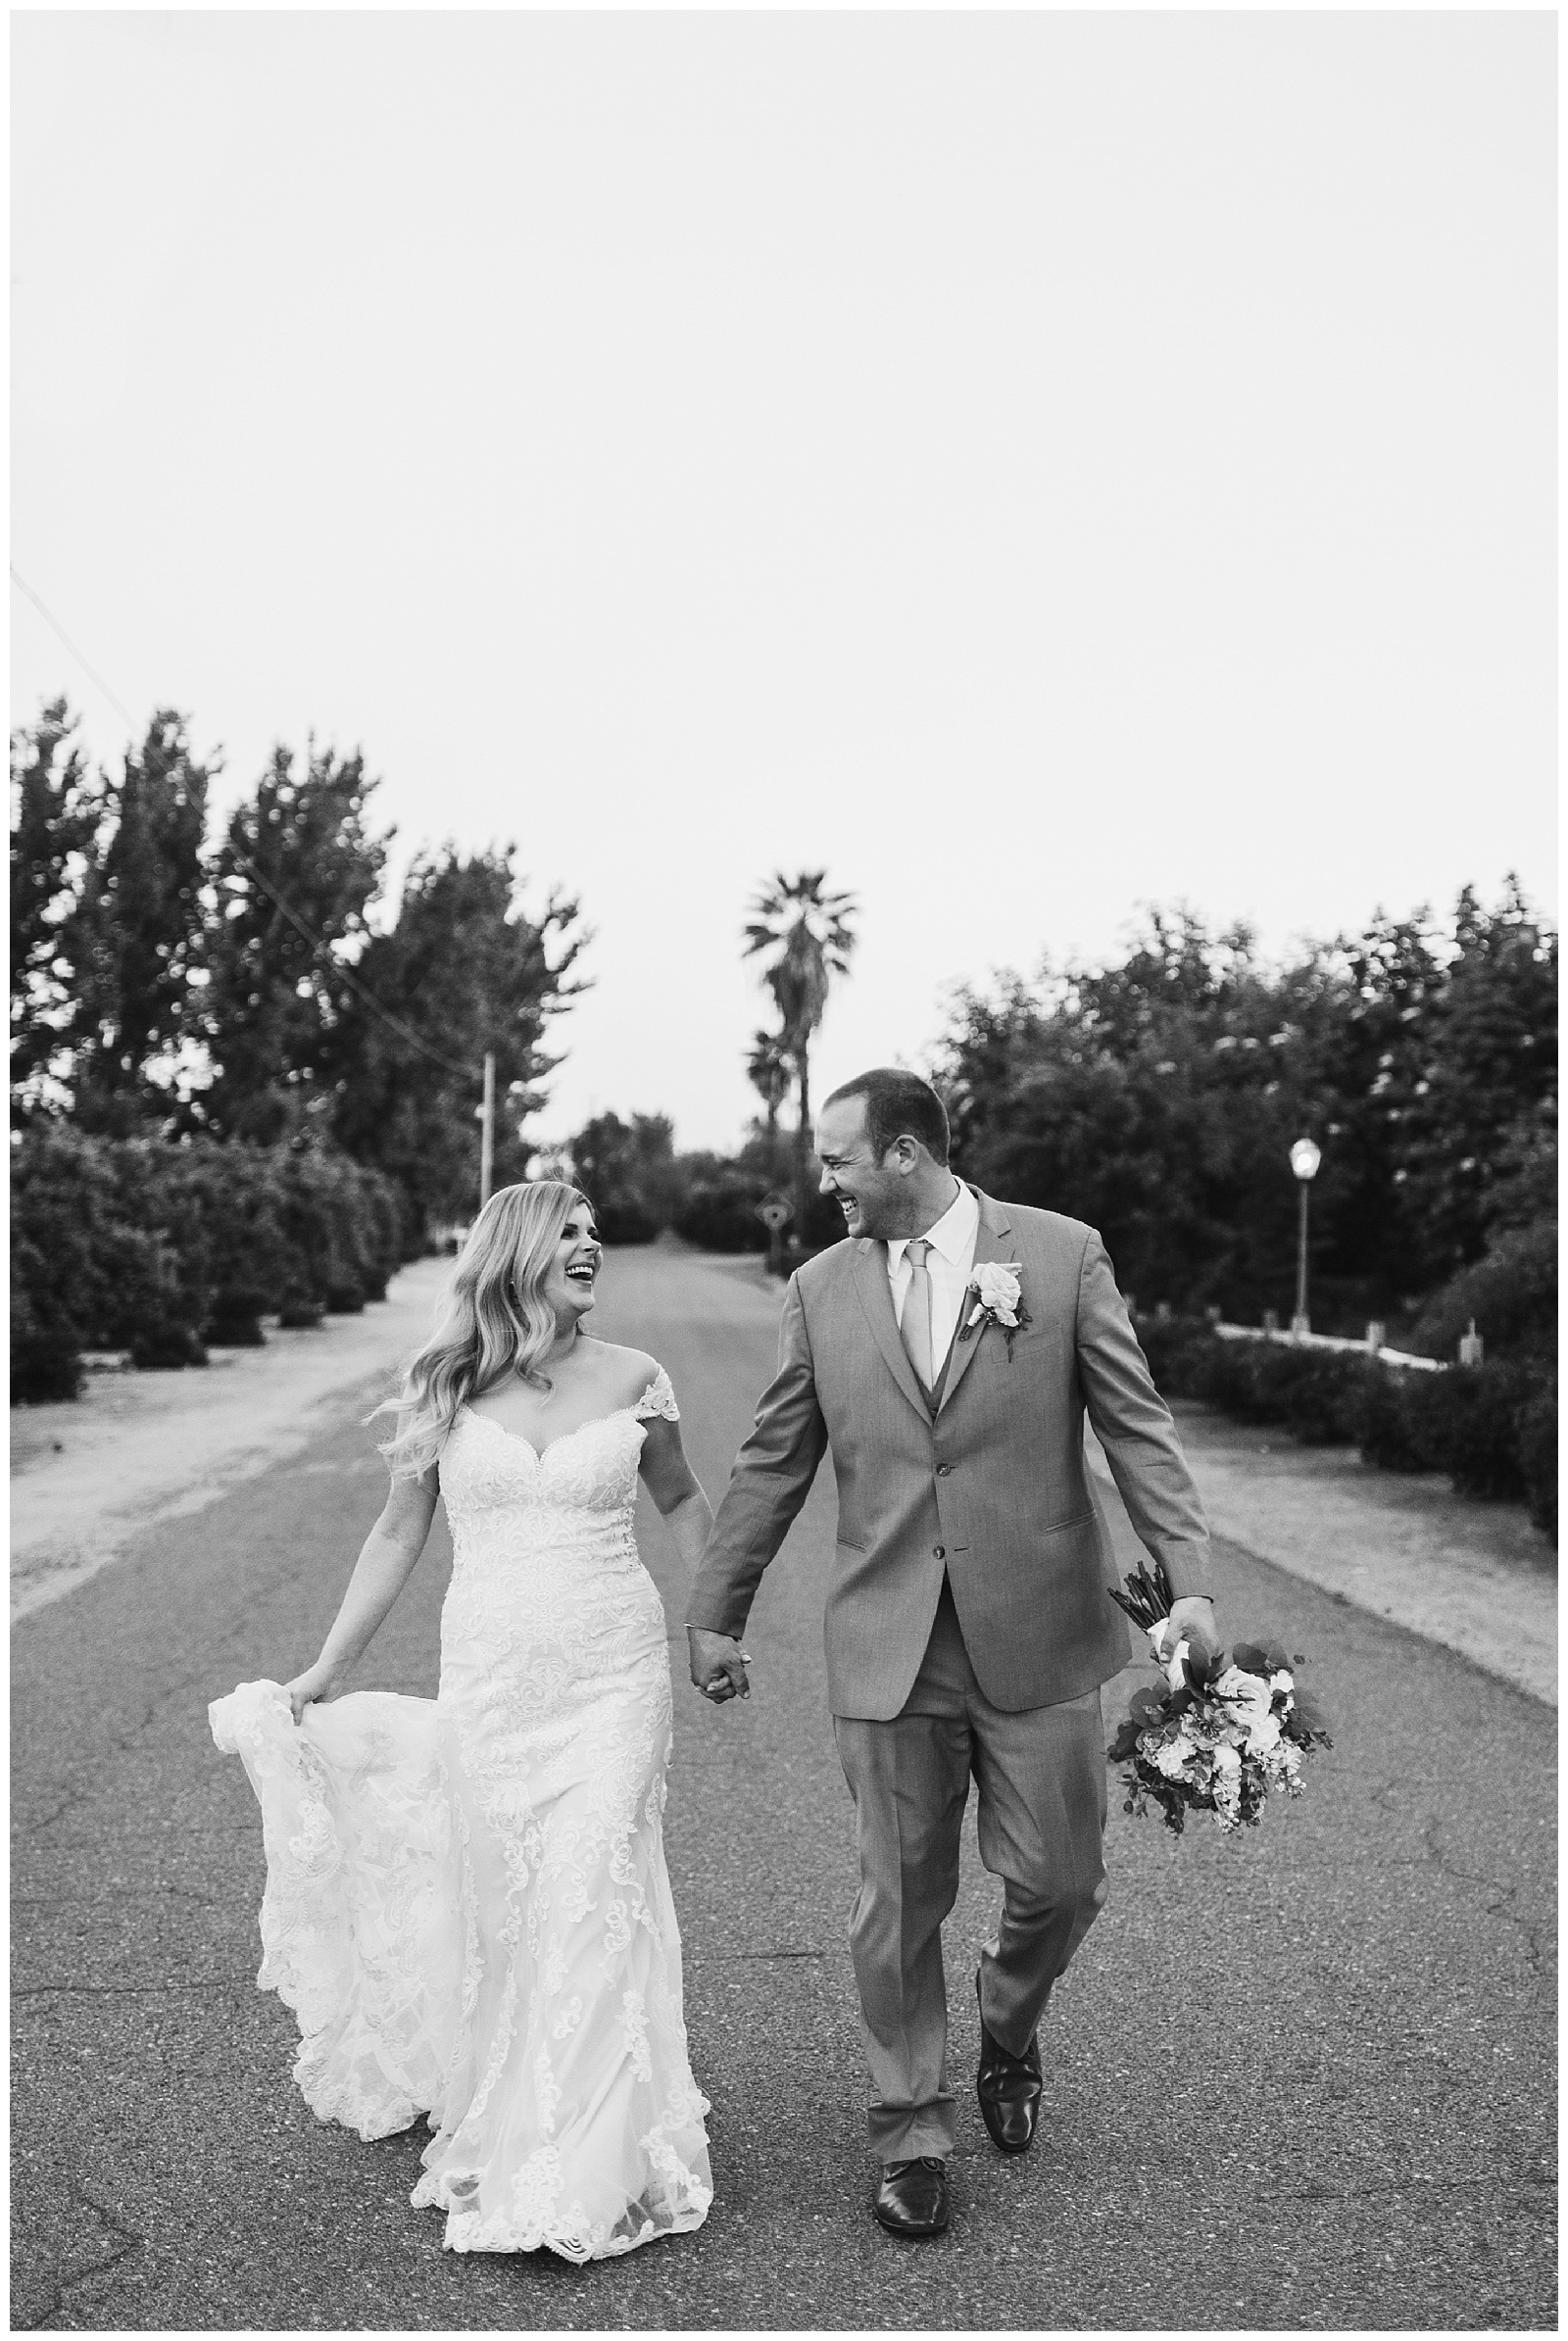 black and white photo of the bride and groom running down the street together